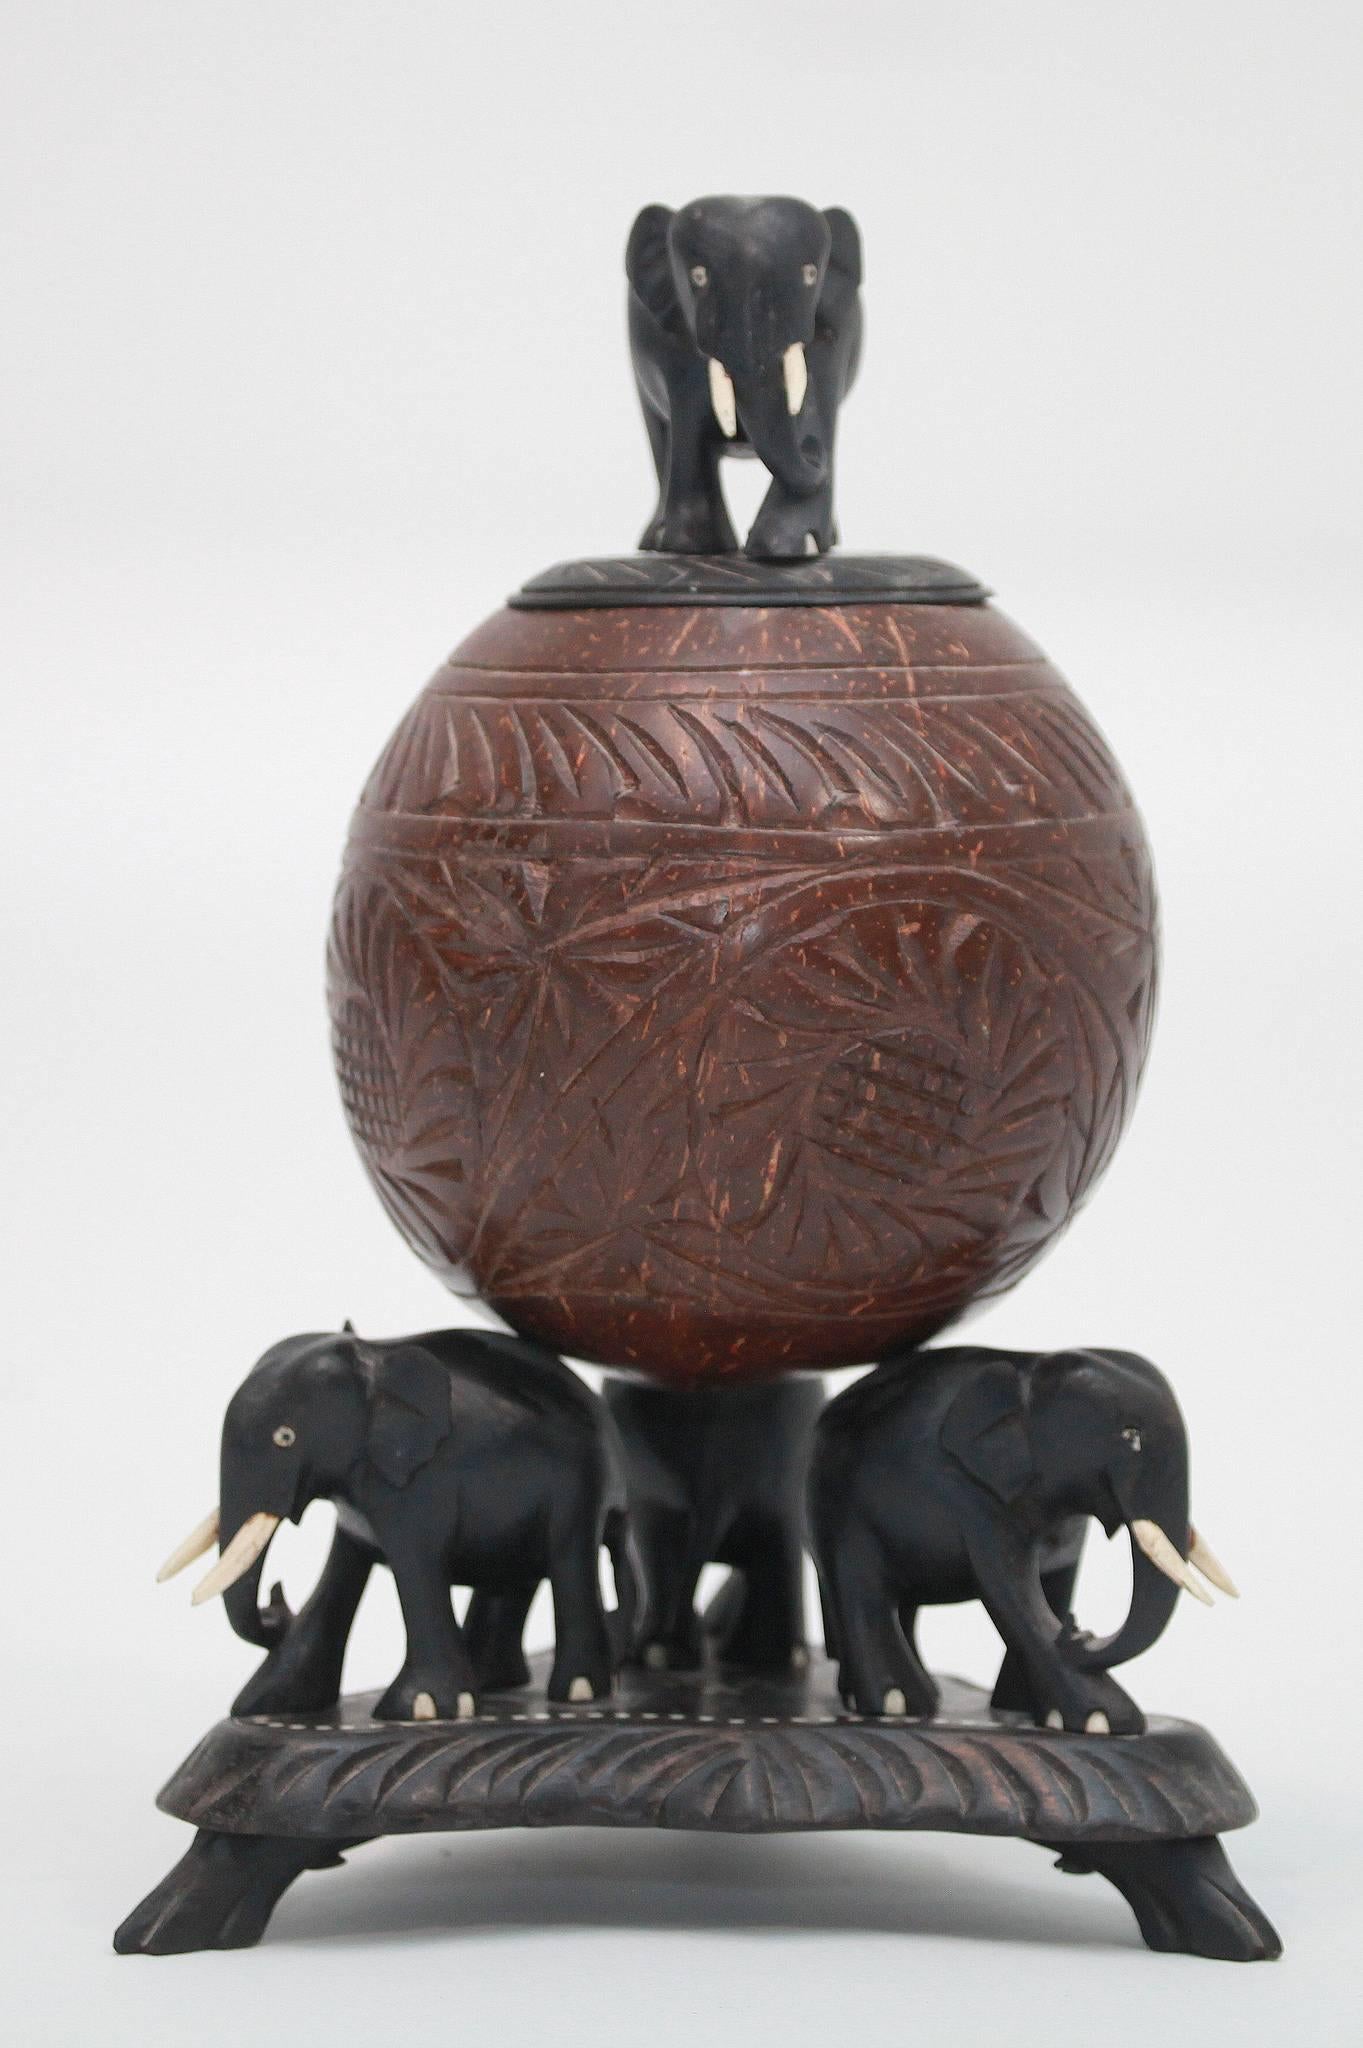 Hand-carved ebony elephants on footed base holding up a carved spherical coconut box and lid.